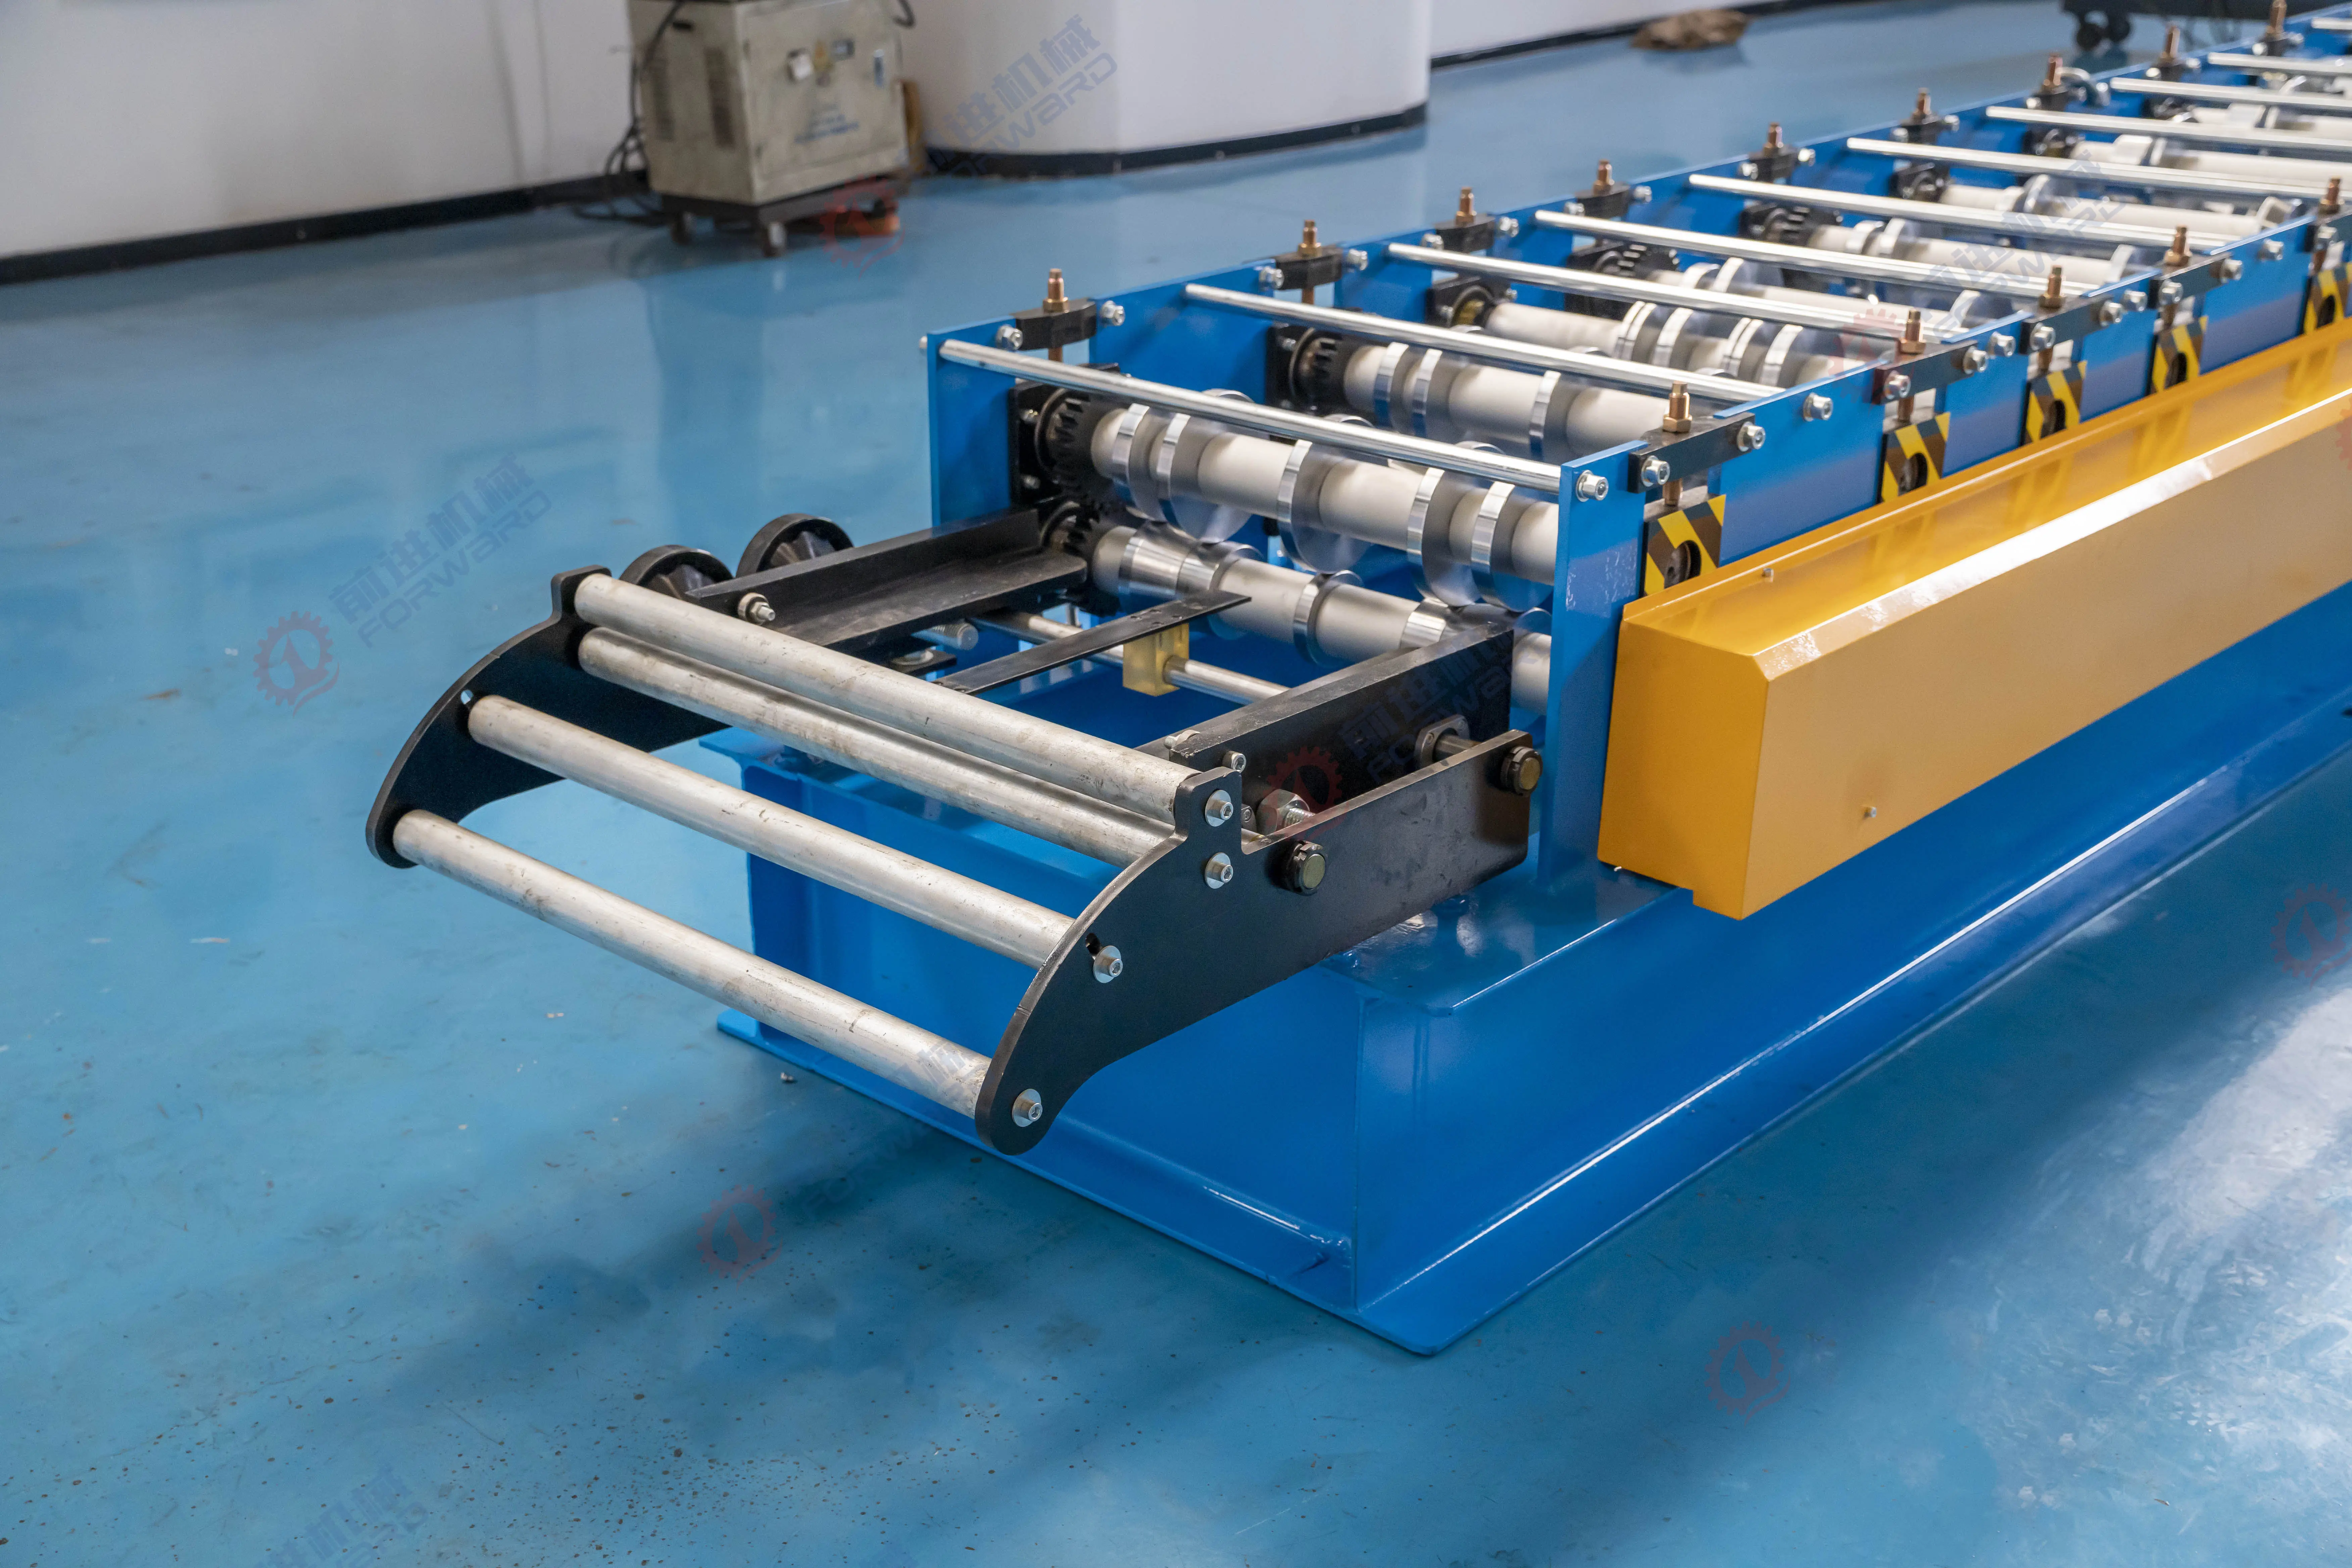 FORWARD Standing Seam Roll Forming Machines Advancing Roofing Industry Standards Worldwide